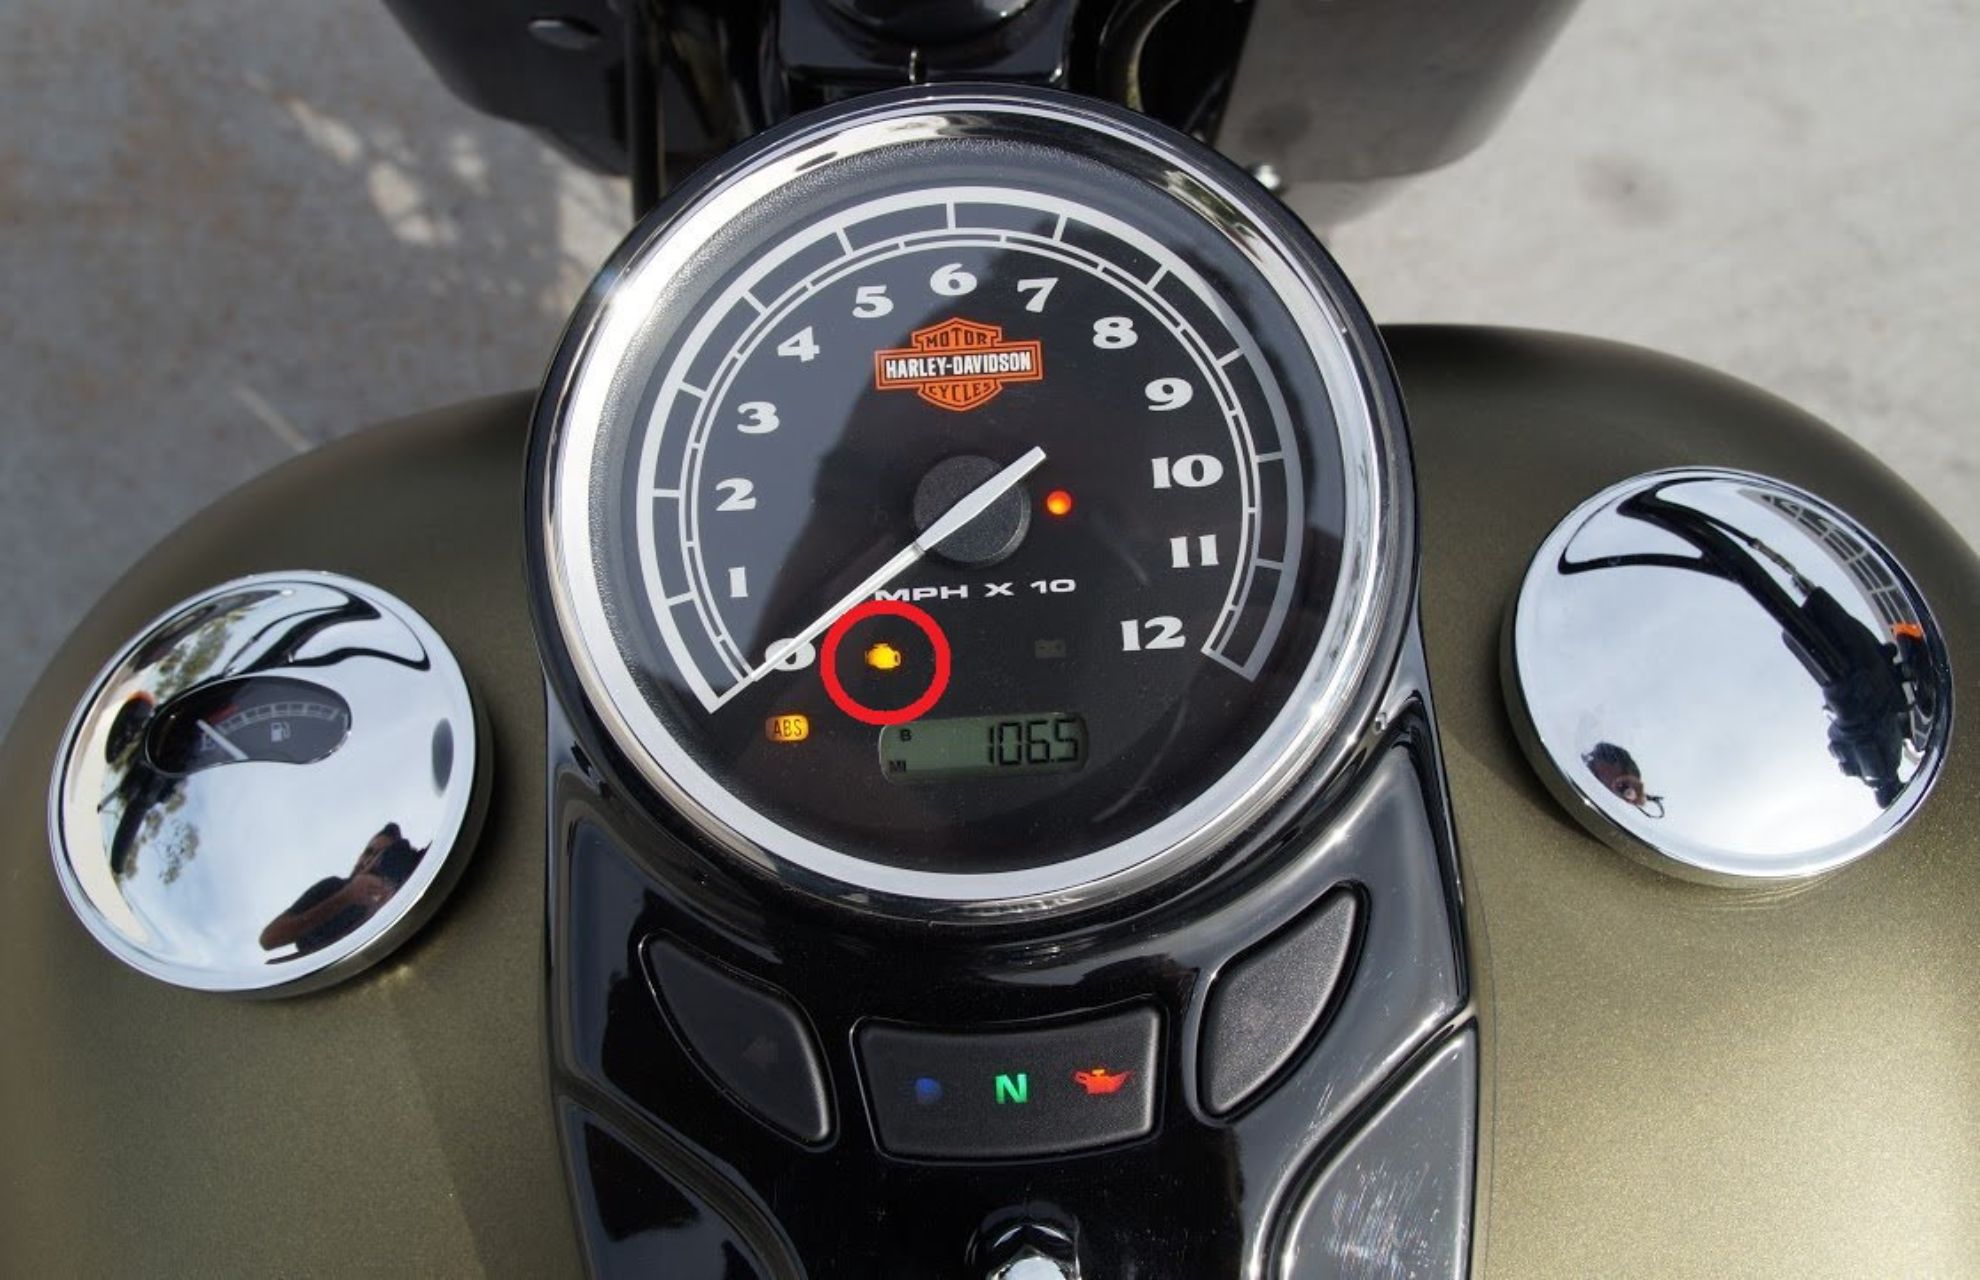 what does the red key light mean on a harley (1)